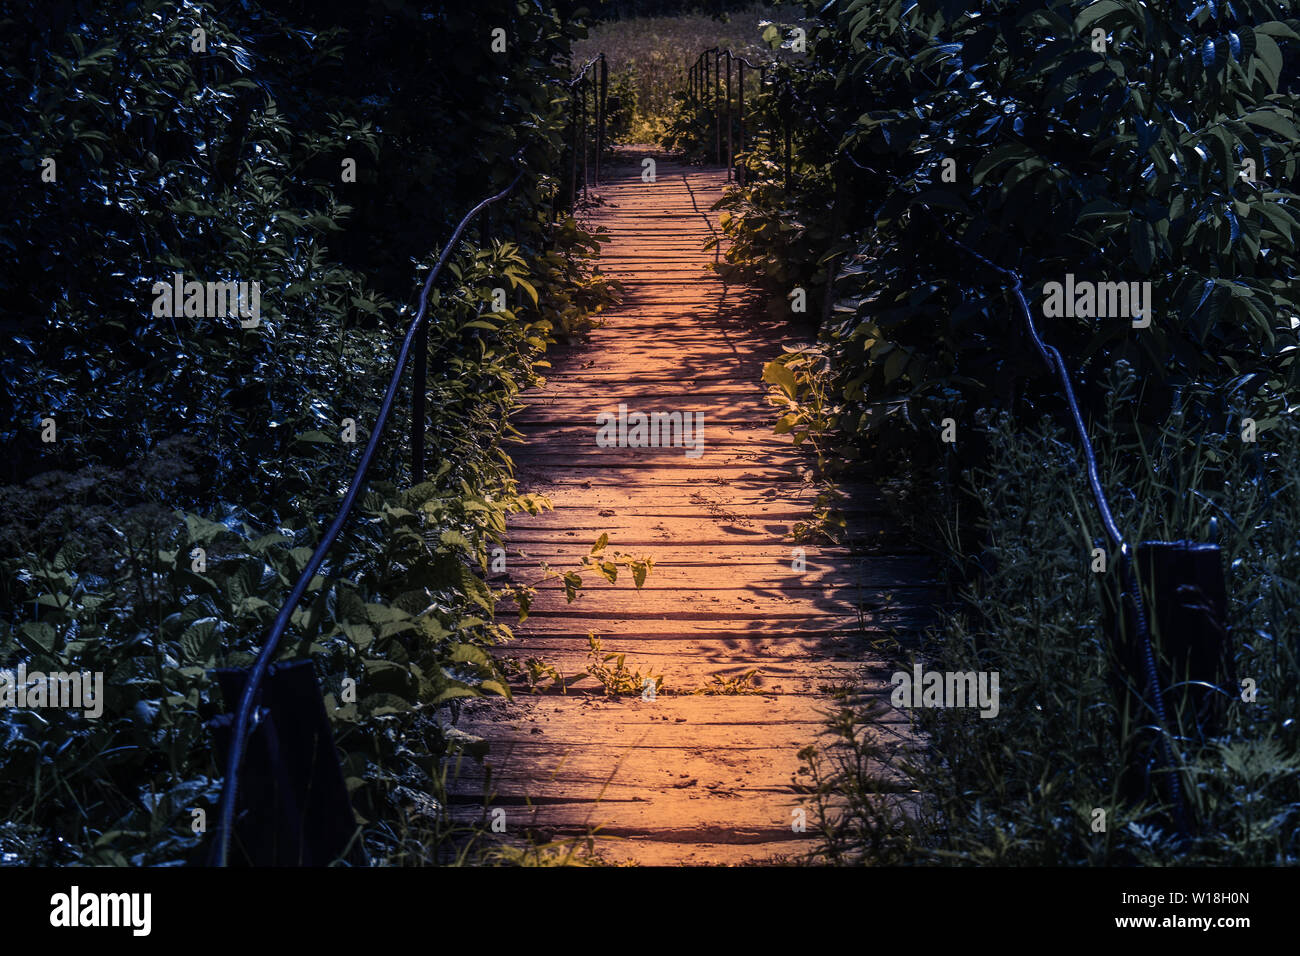 Wooden highlight footbridge at night in a fairy tale atmosphere. Pathway in the dark spooky forest in the moonlight. Stock Photo